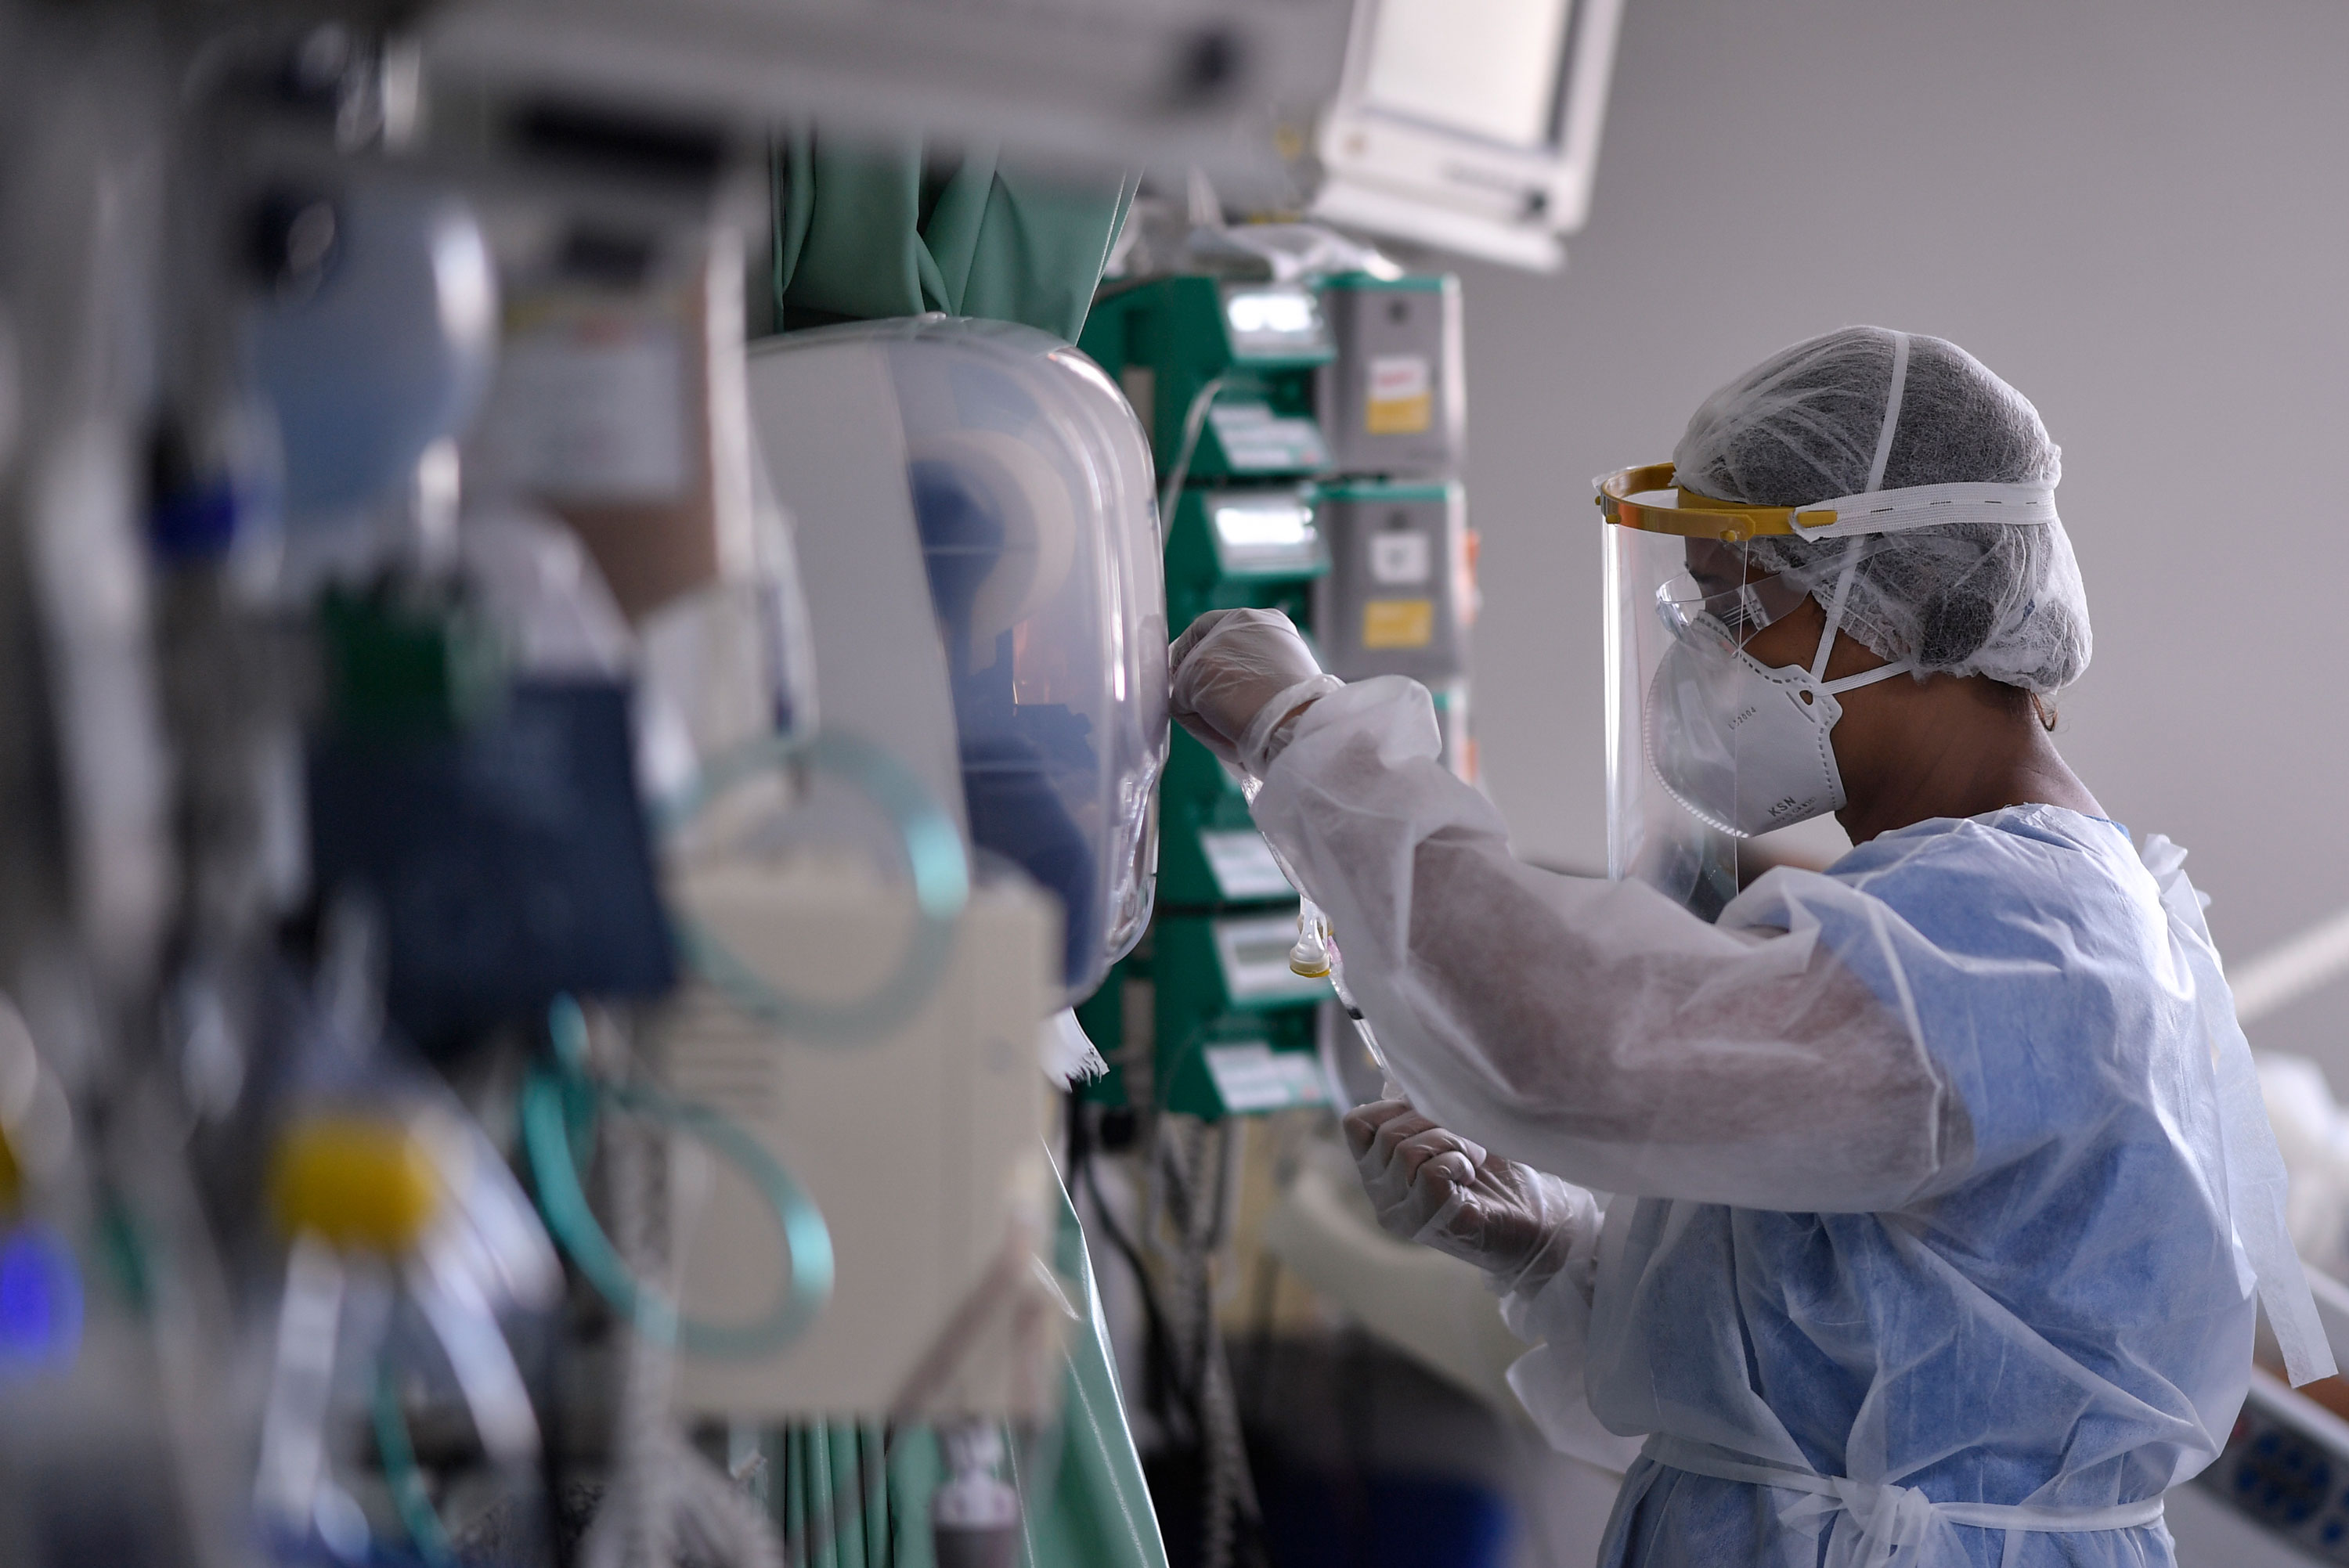 A health professional works in the intensive care unit ward, where patients infected with the COVID-19 are being treated, at the Santa Casa hospital in Belo Horizonte, Brazil, on June 1.